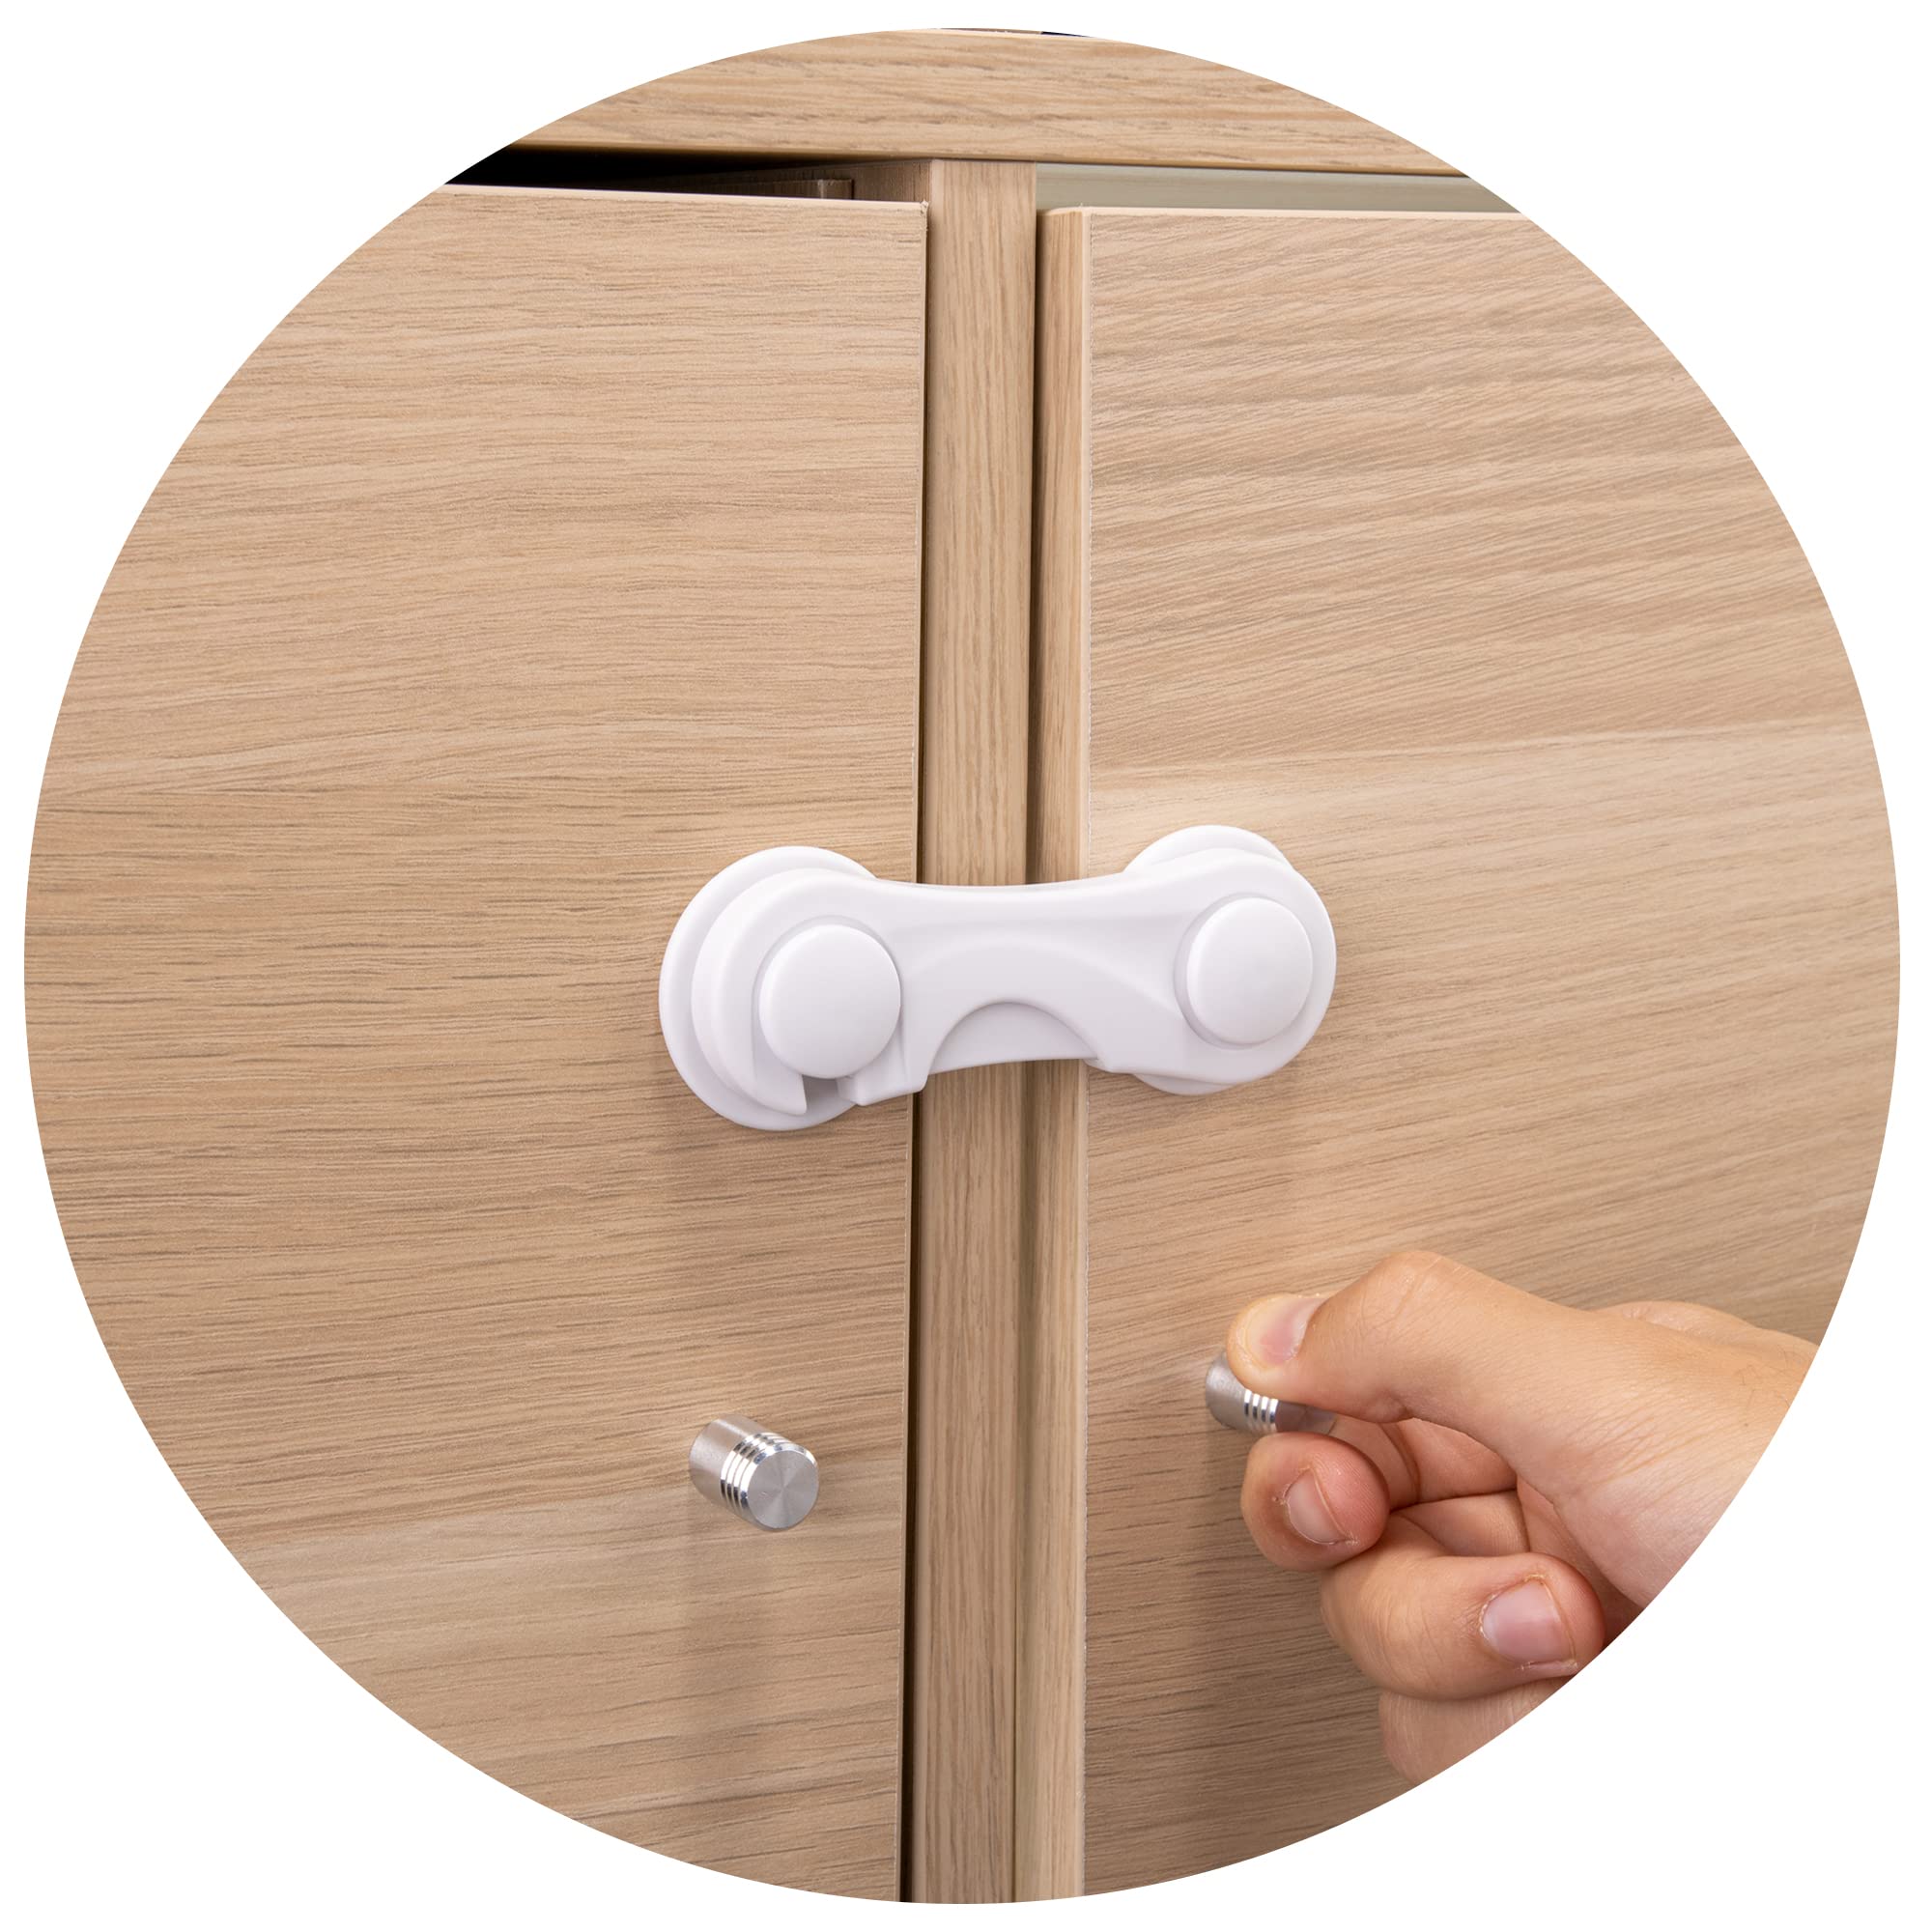 Inaya Cabinet Locks Child Safety Latches (8 Pack) - Baby Proofing Cabinets & Drawers Locks - Child Proof Your Home - No Drilling & No Tools Required!, Size